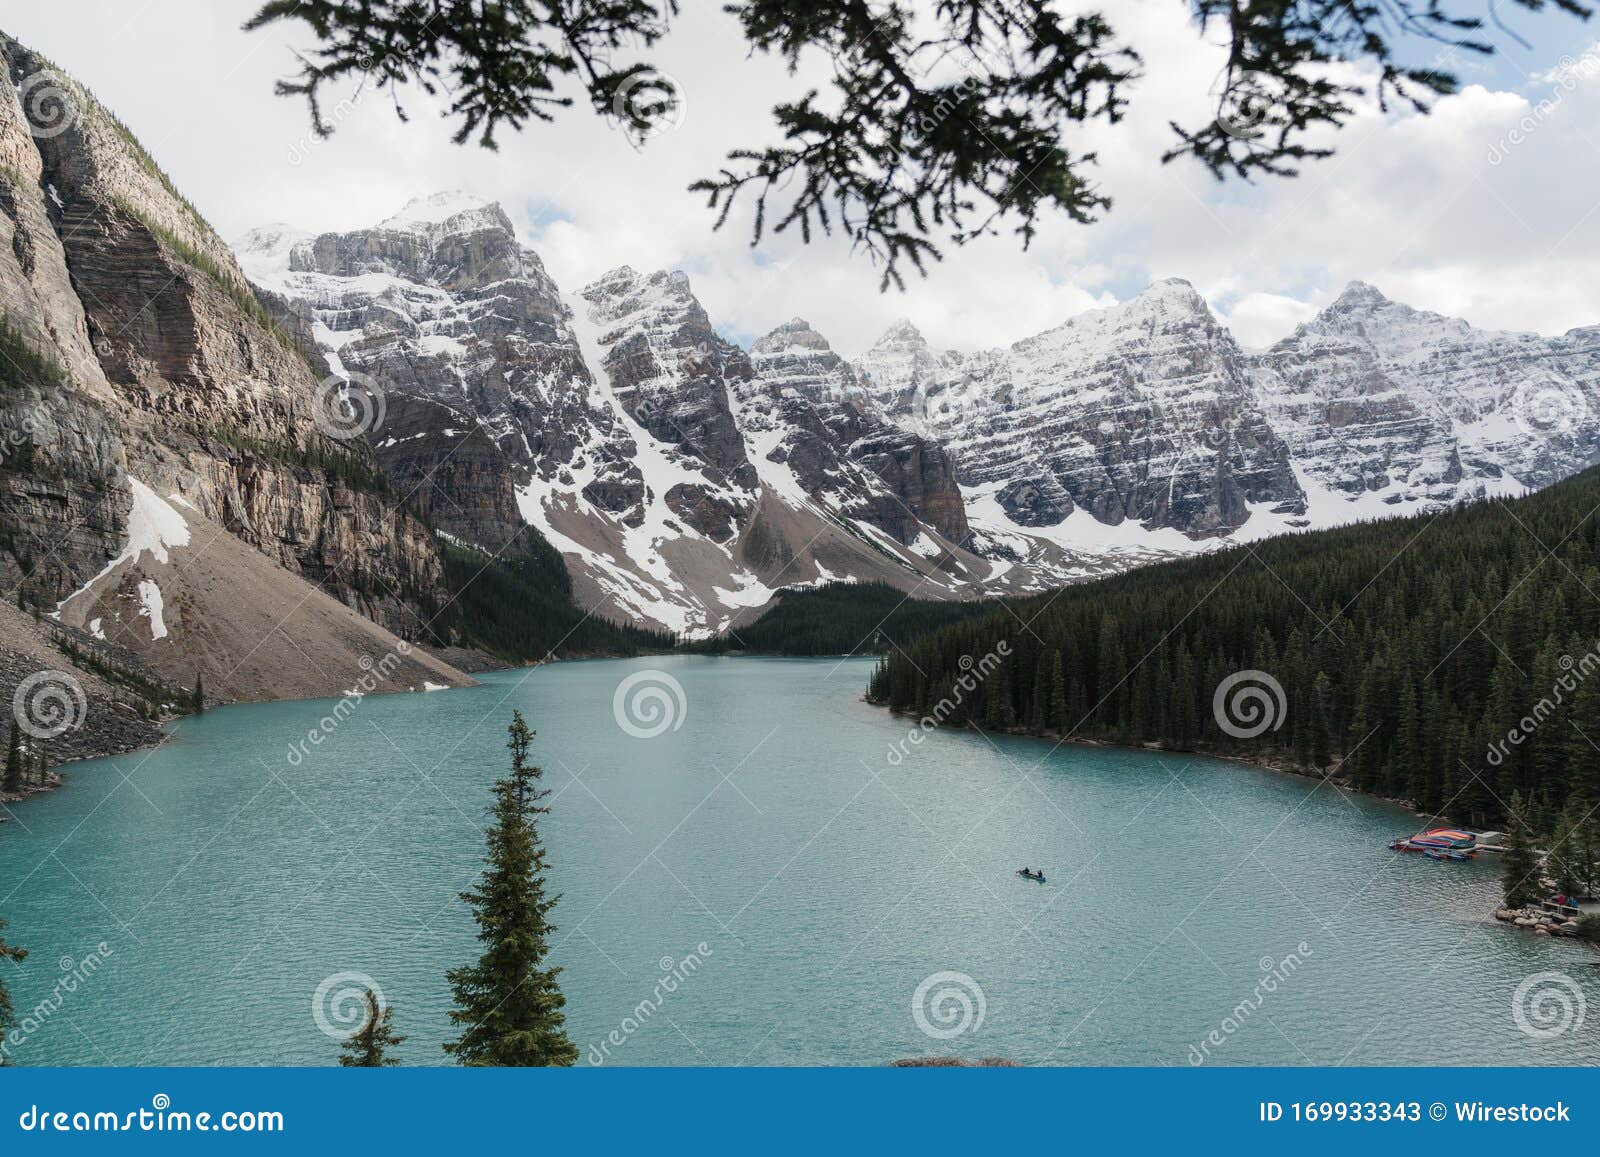 High Angle Shot Of A Clear Frozen Lake Surrounded By A Mountainous